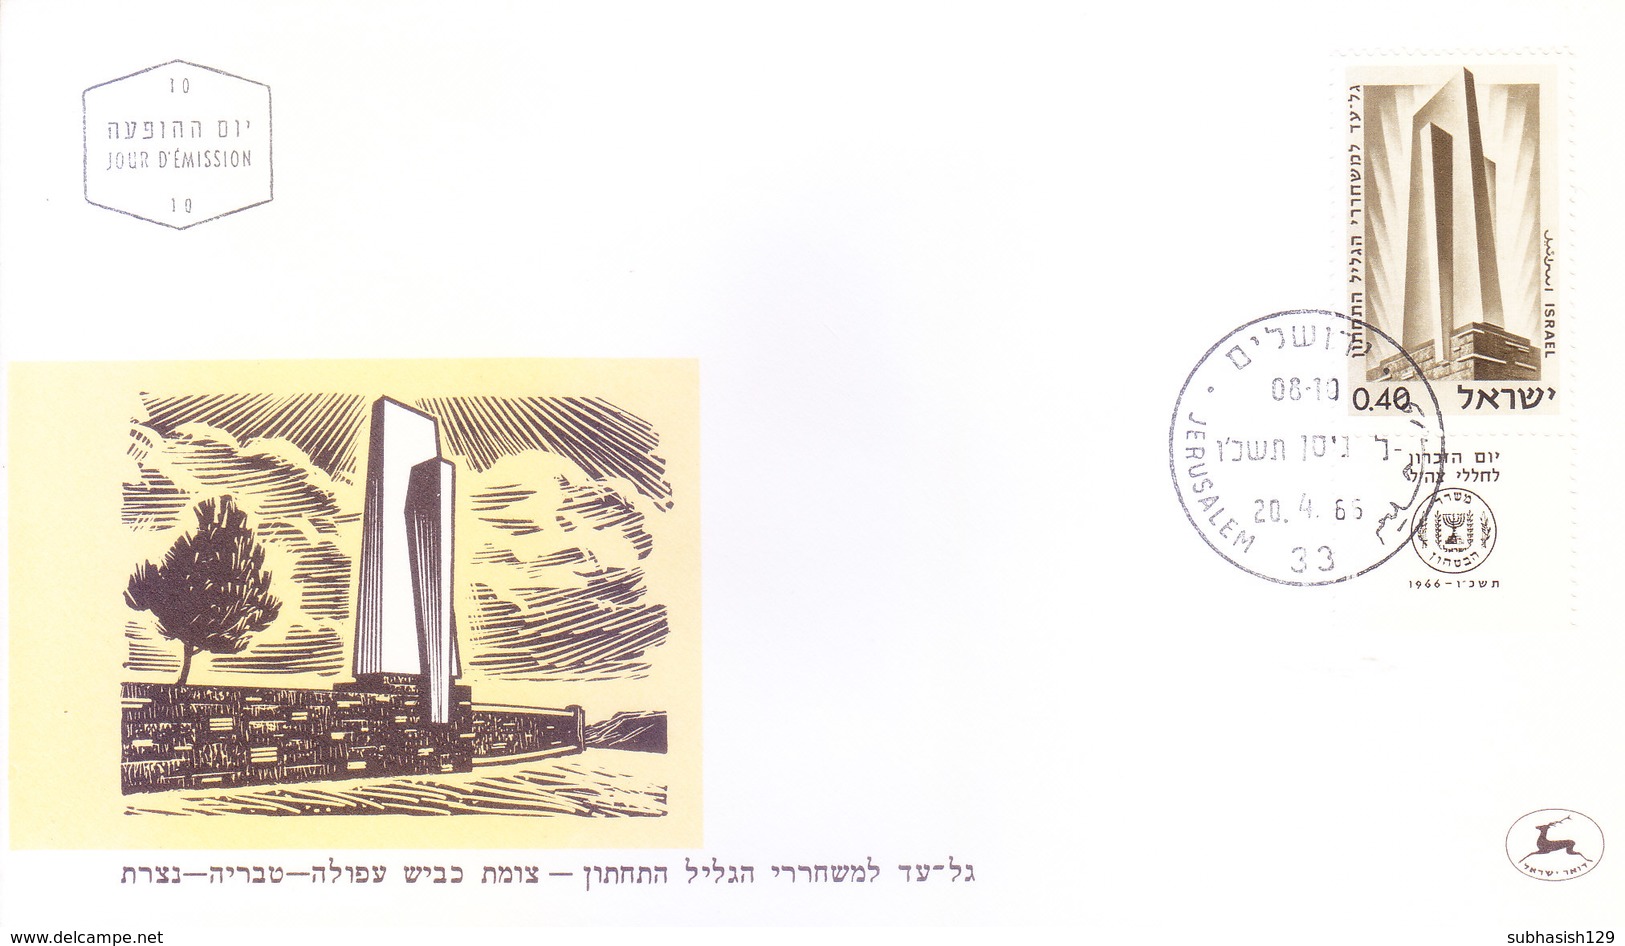 ISRAEL : FIRST DAY COVER : 20-04-1966 : ISSUED FROM JERUSALEM : FALLEN SOLDIER MEMORIAL DAY : USE OF TAB STAMP - Lettres & Documents